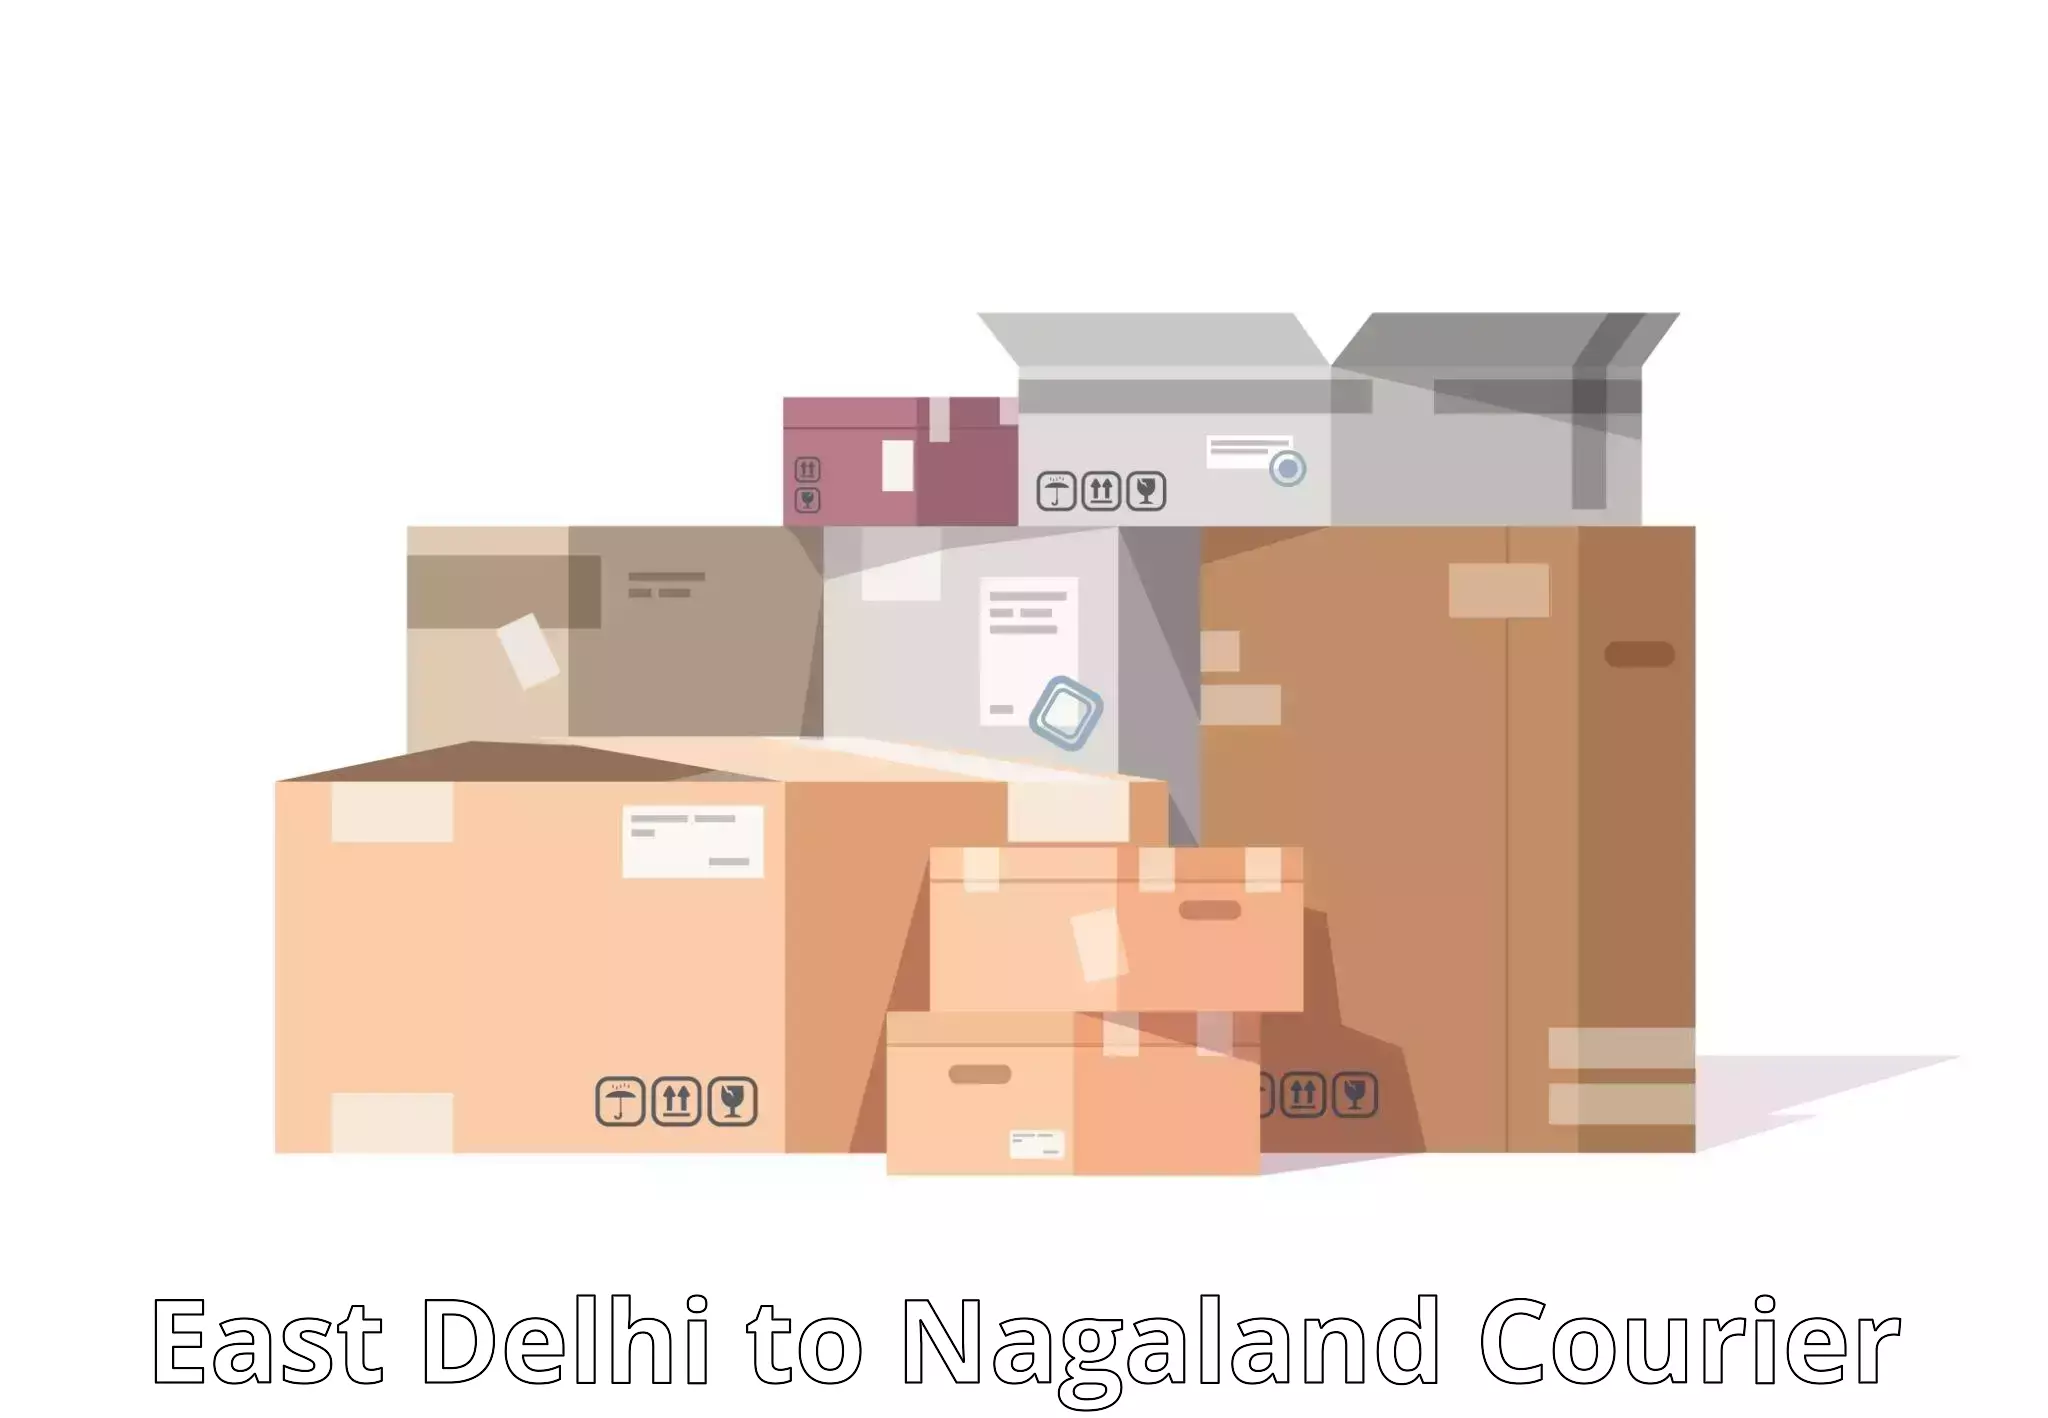 Easy access courier services in East Delhi to Chumukedima